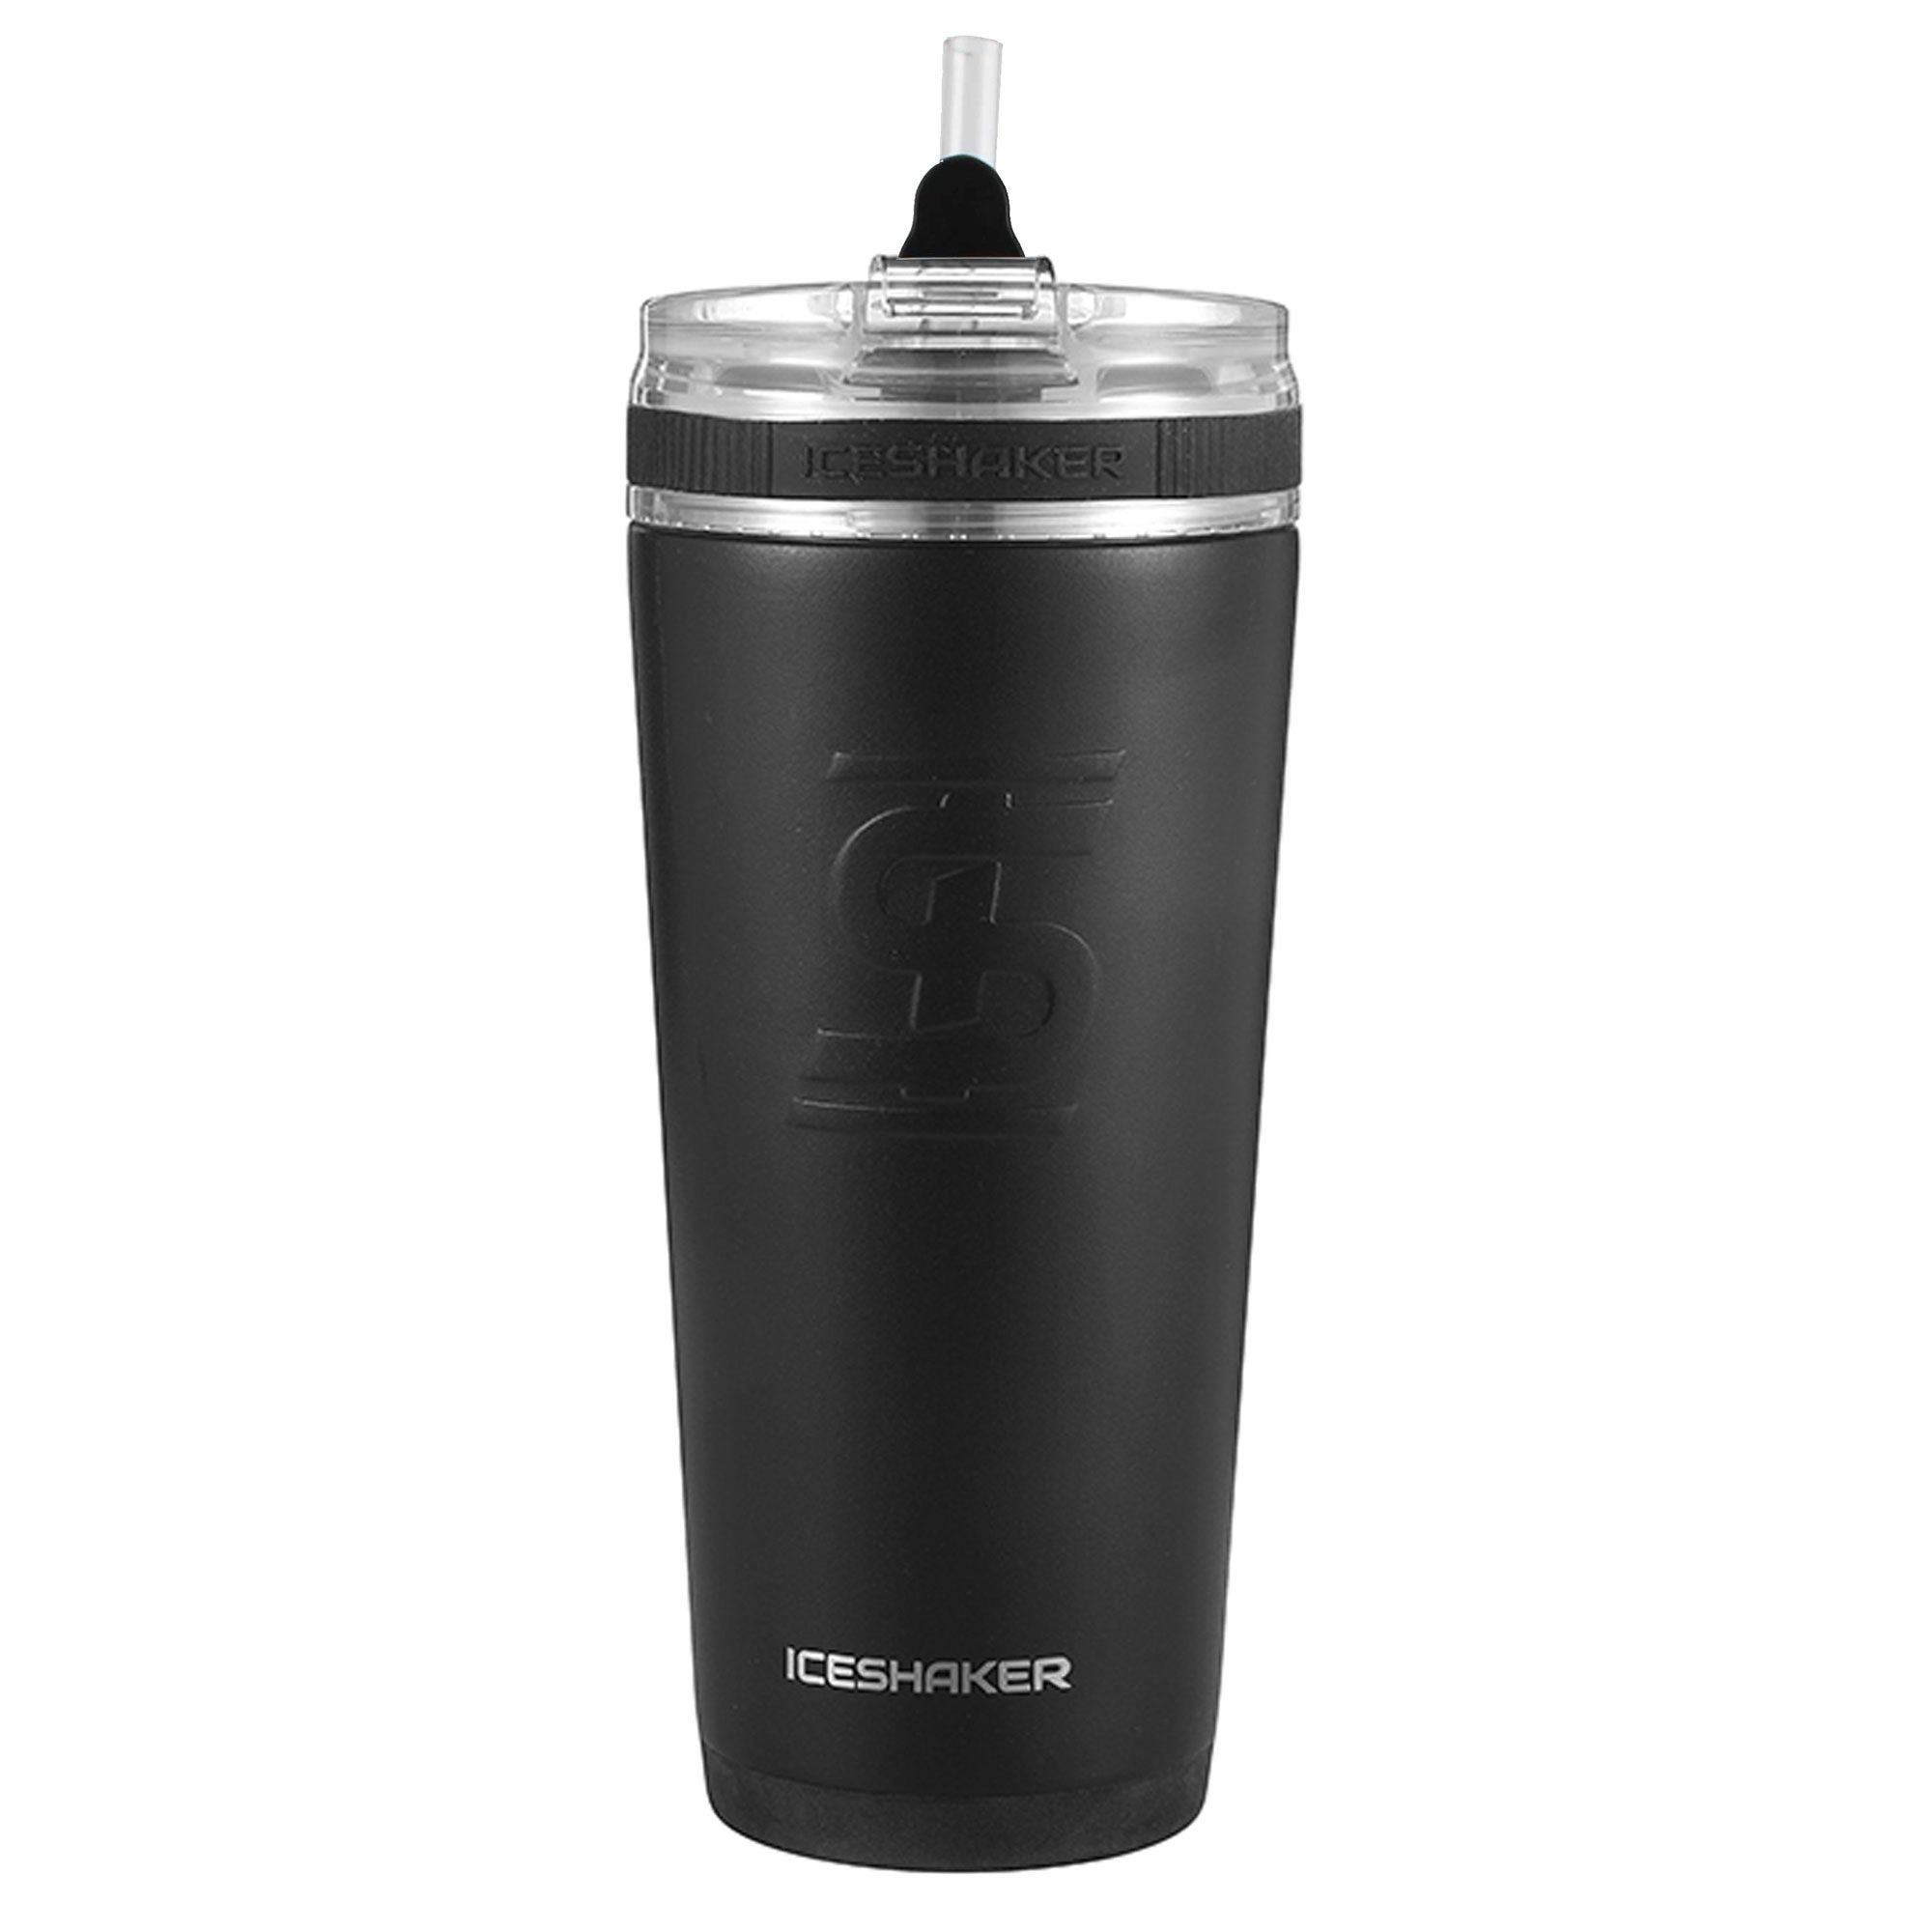 Portions Master 32 oz Shaker Cup